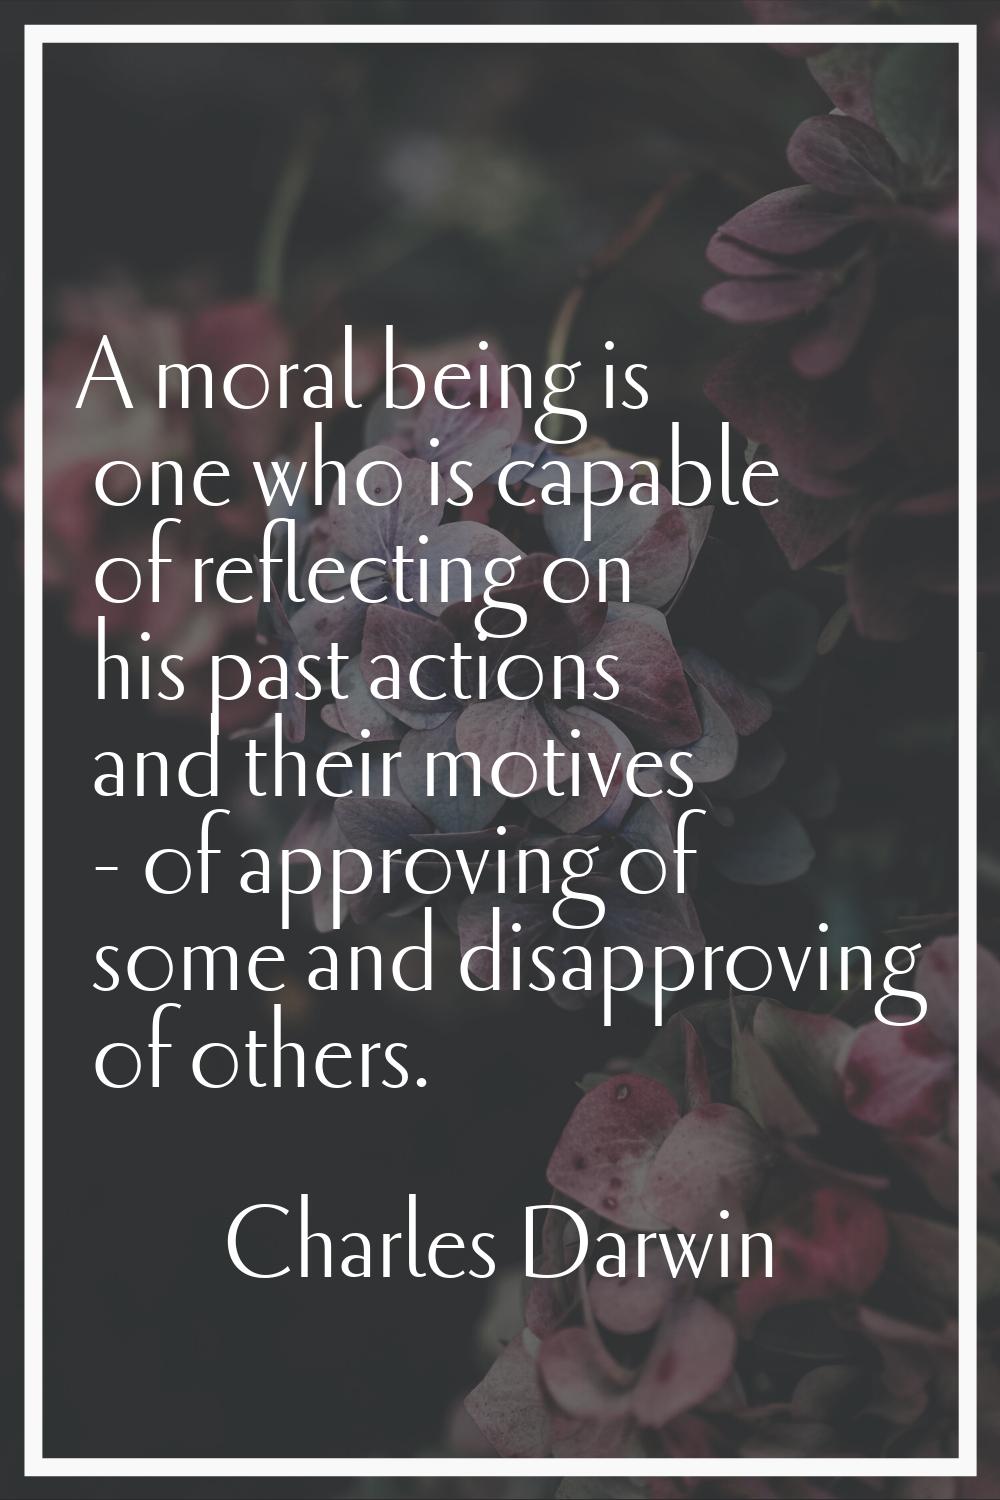 A moral being is one who is capable of reflecting on his past actions and their motives - of approv